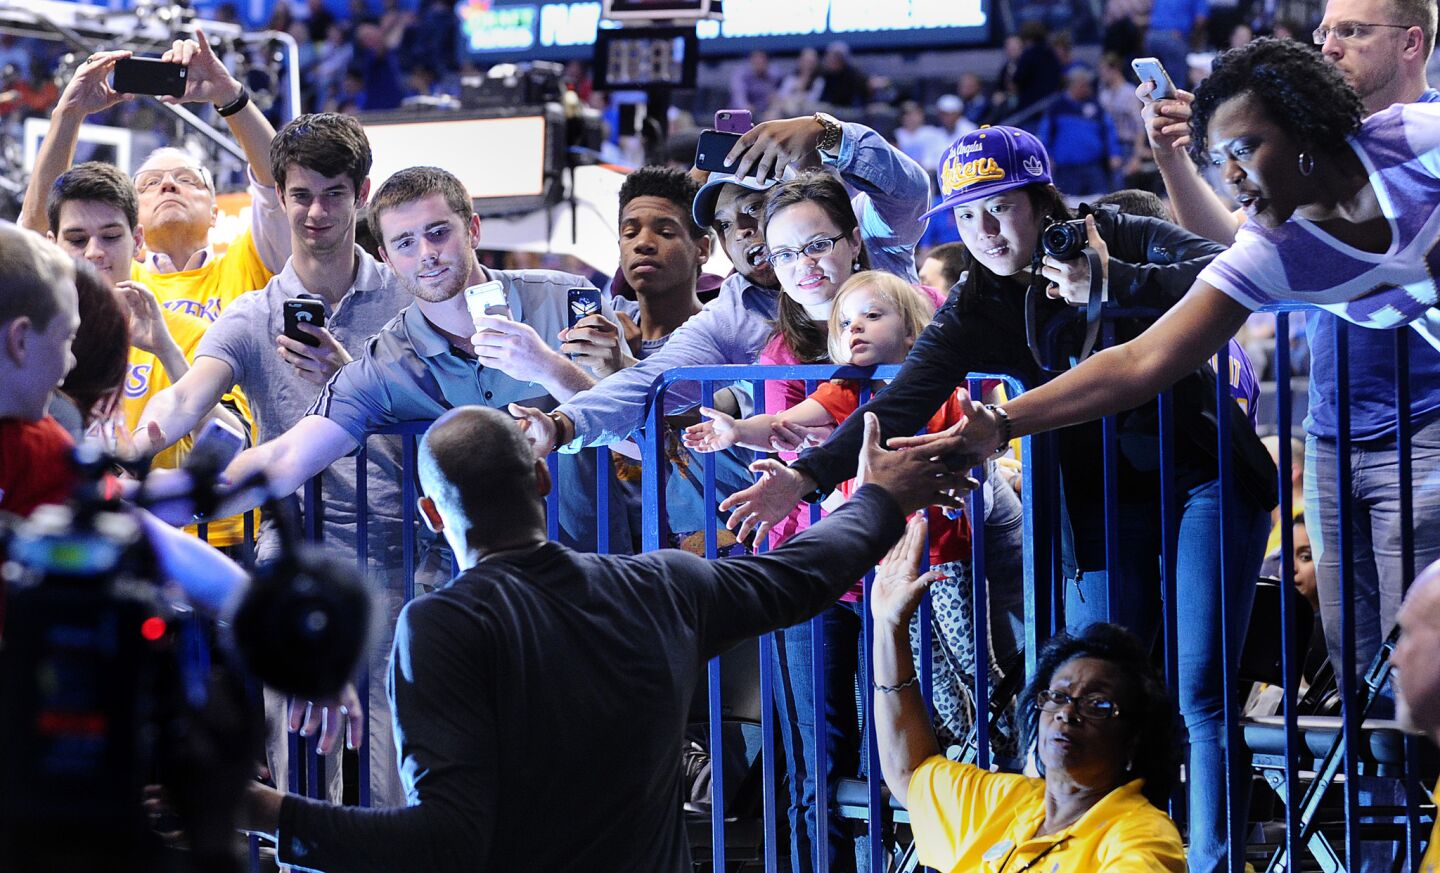 Kobe Bryant high-fives fans as he returns to the court during halftime against the Thunder in Oklahoma City on April 11.